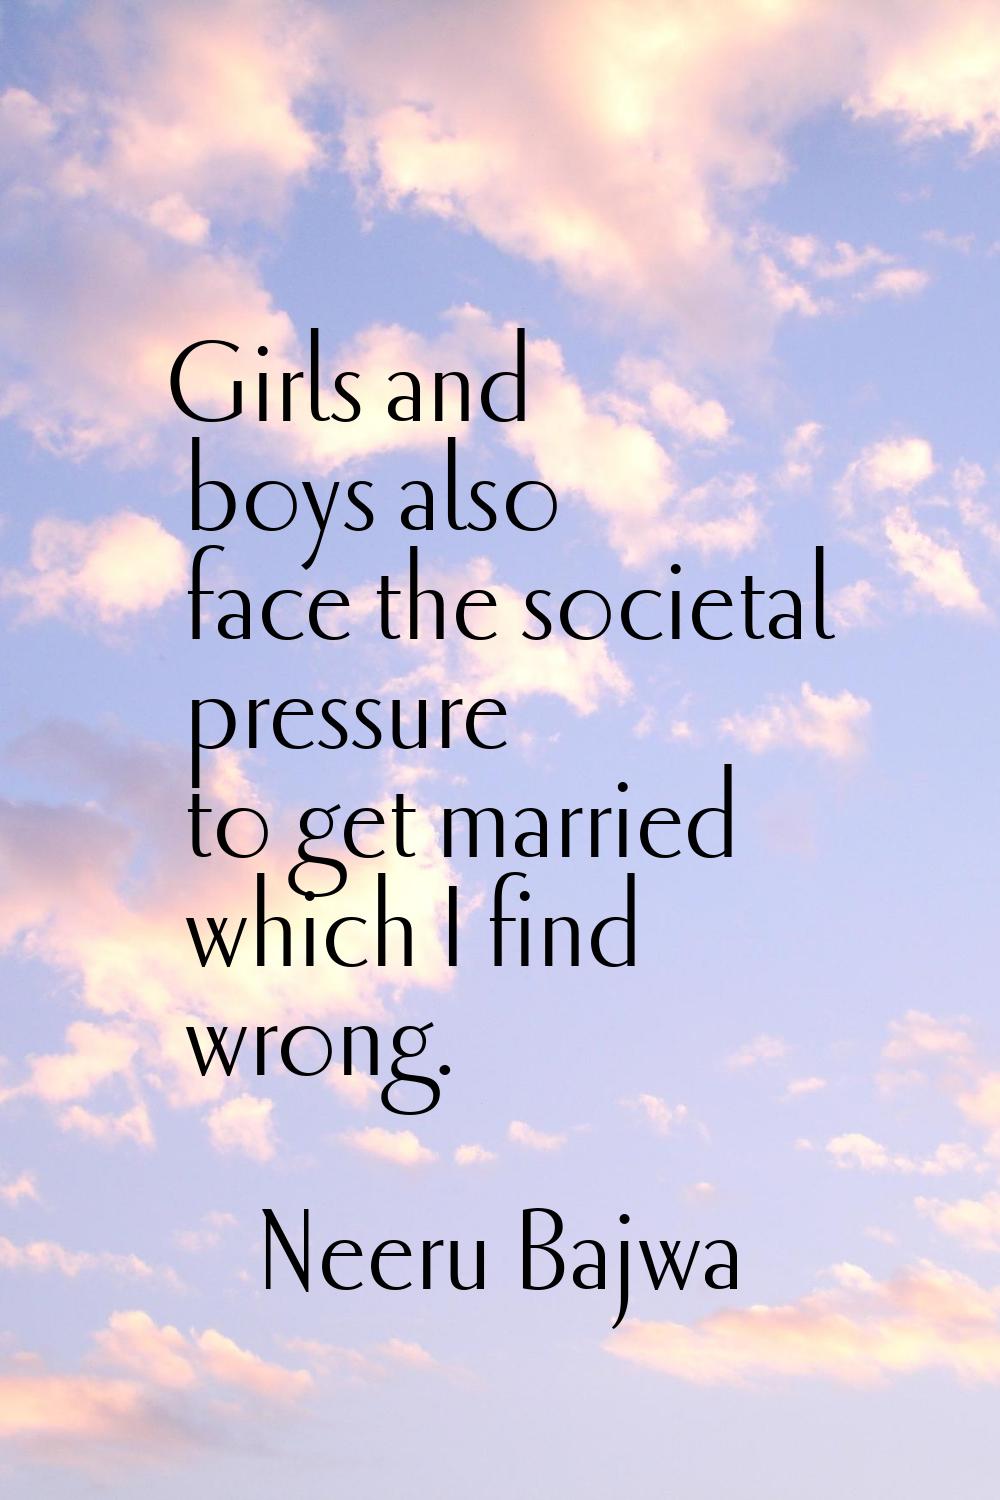 Girls and boys also face the societal pressure to get married which I find wrong.